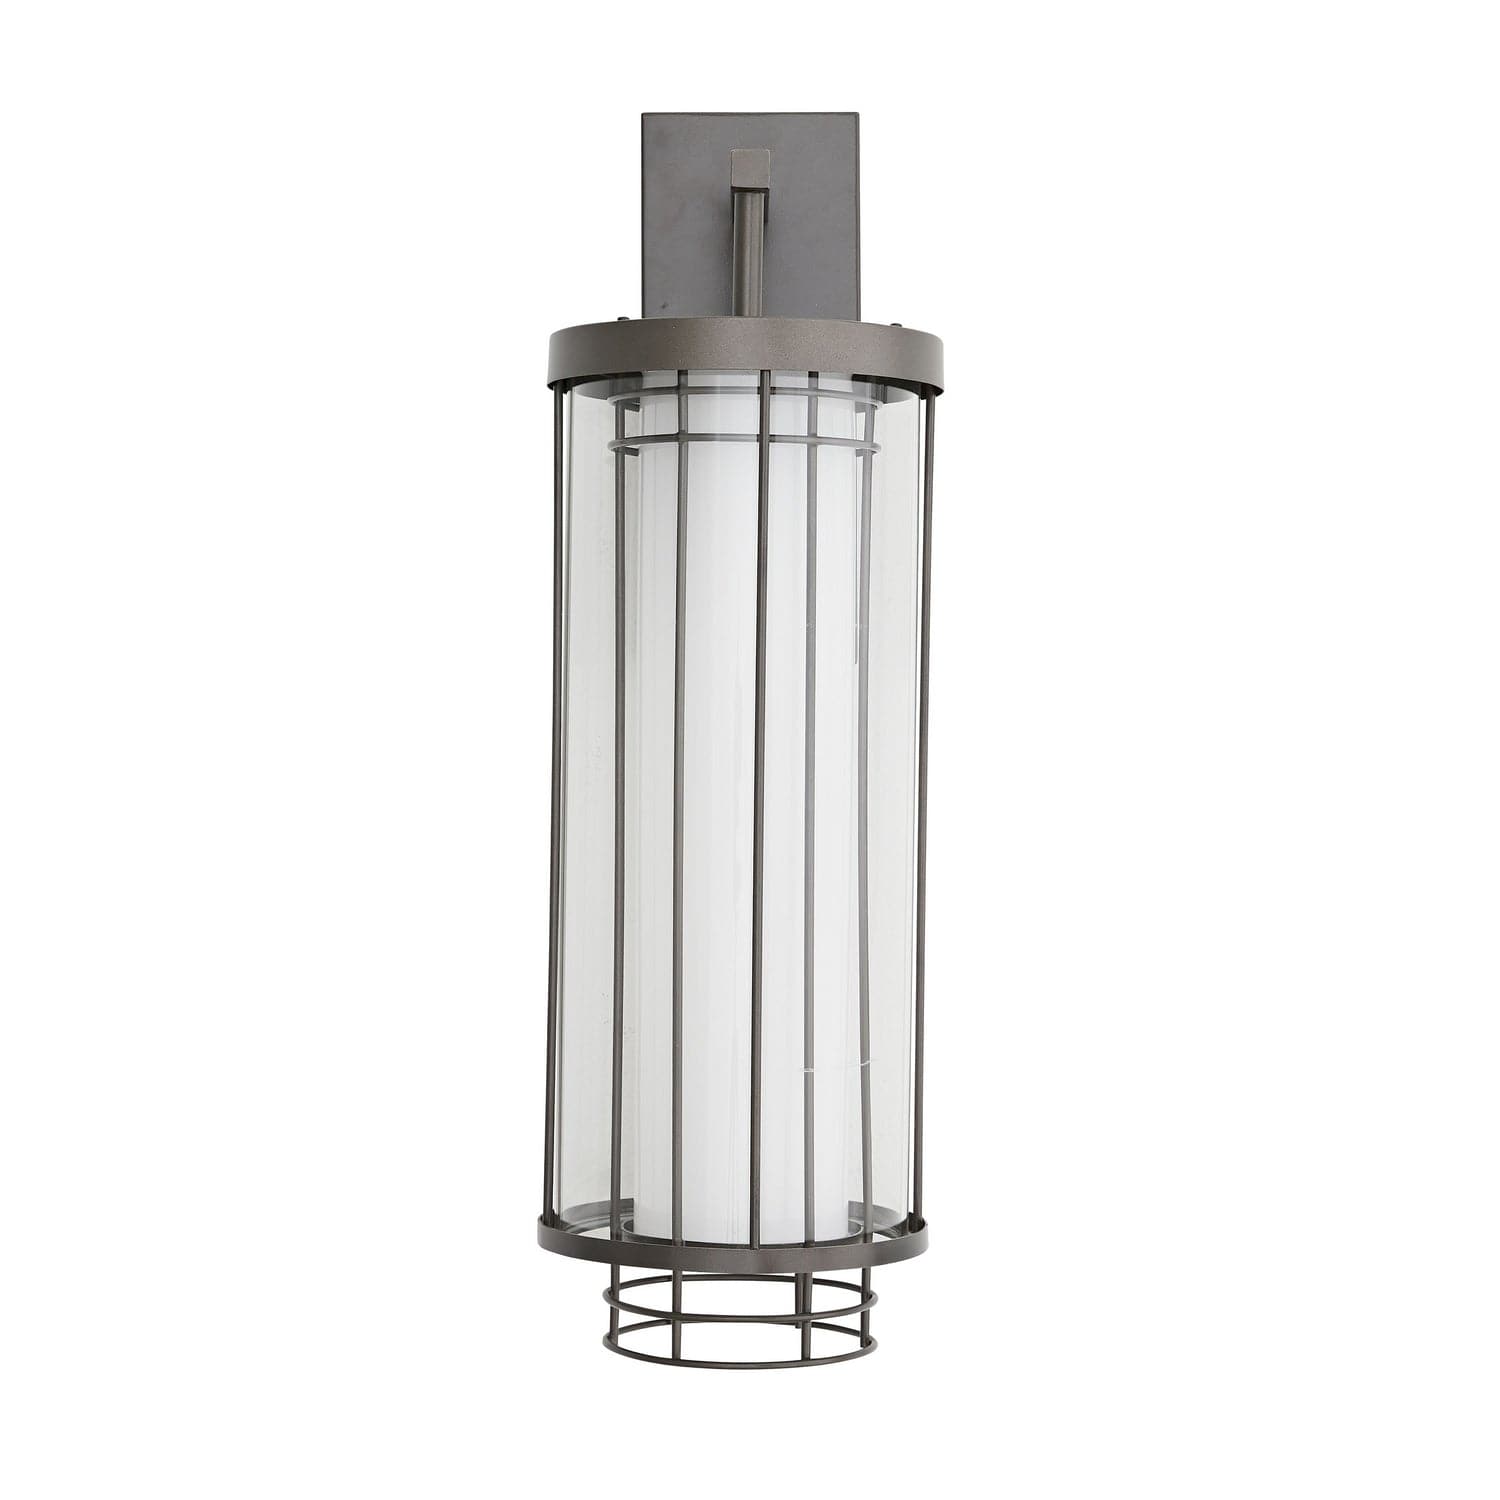 Arteriors - 49650 - One Light Wall Sconce - Evan - Aged Iron